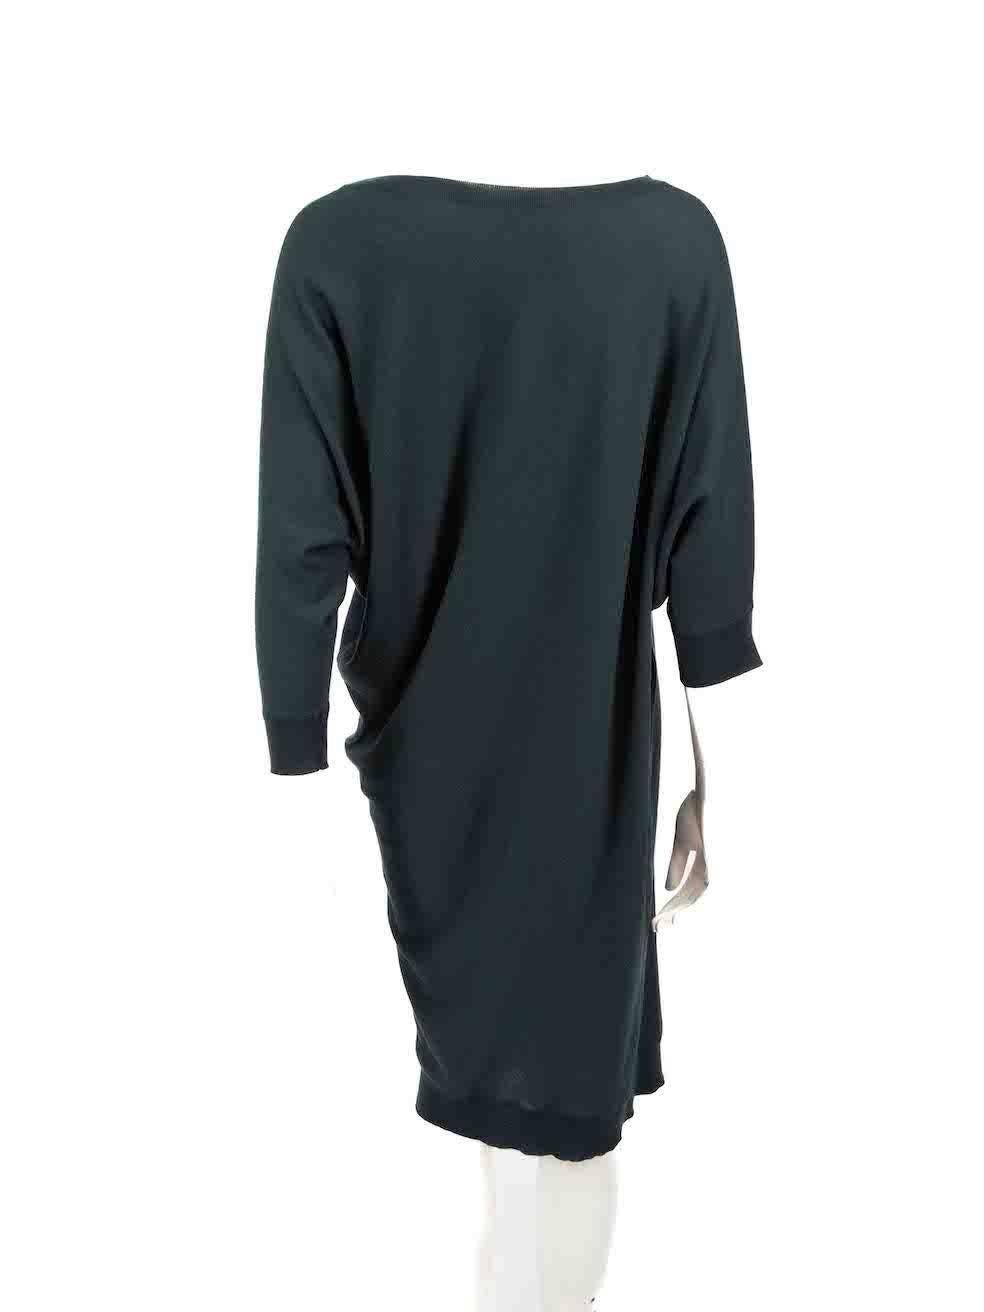 Alexander McQueen Green Wool Knee Length Dress Size L In Excellent Condition For Sale In London, GB